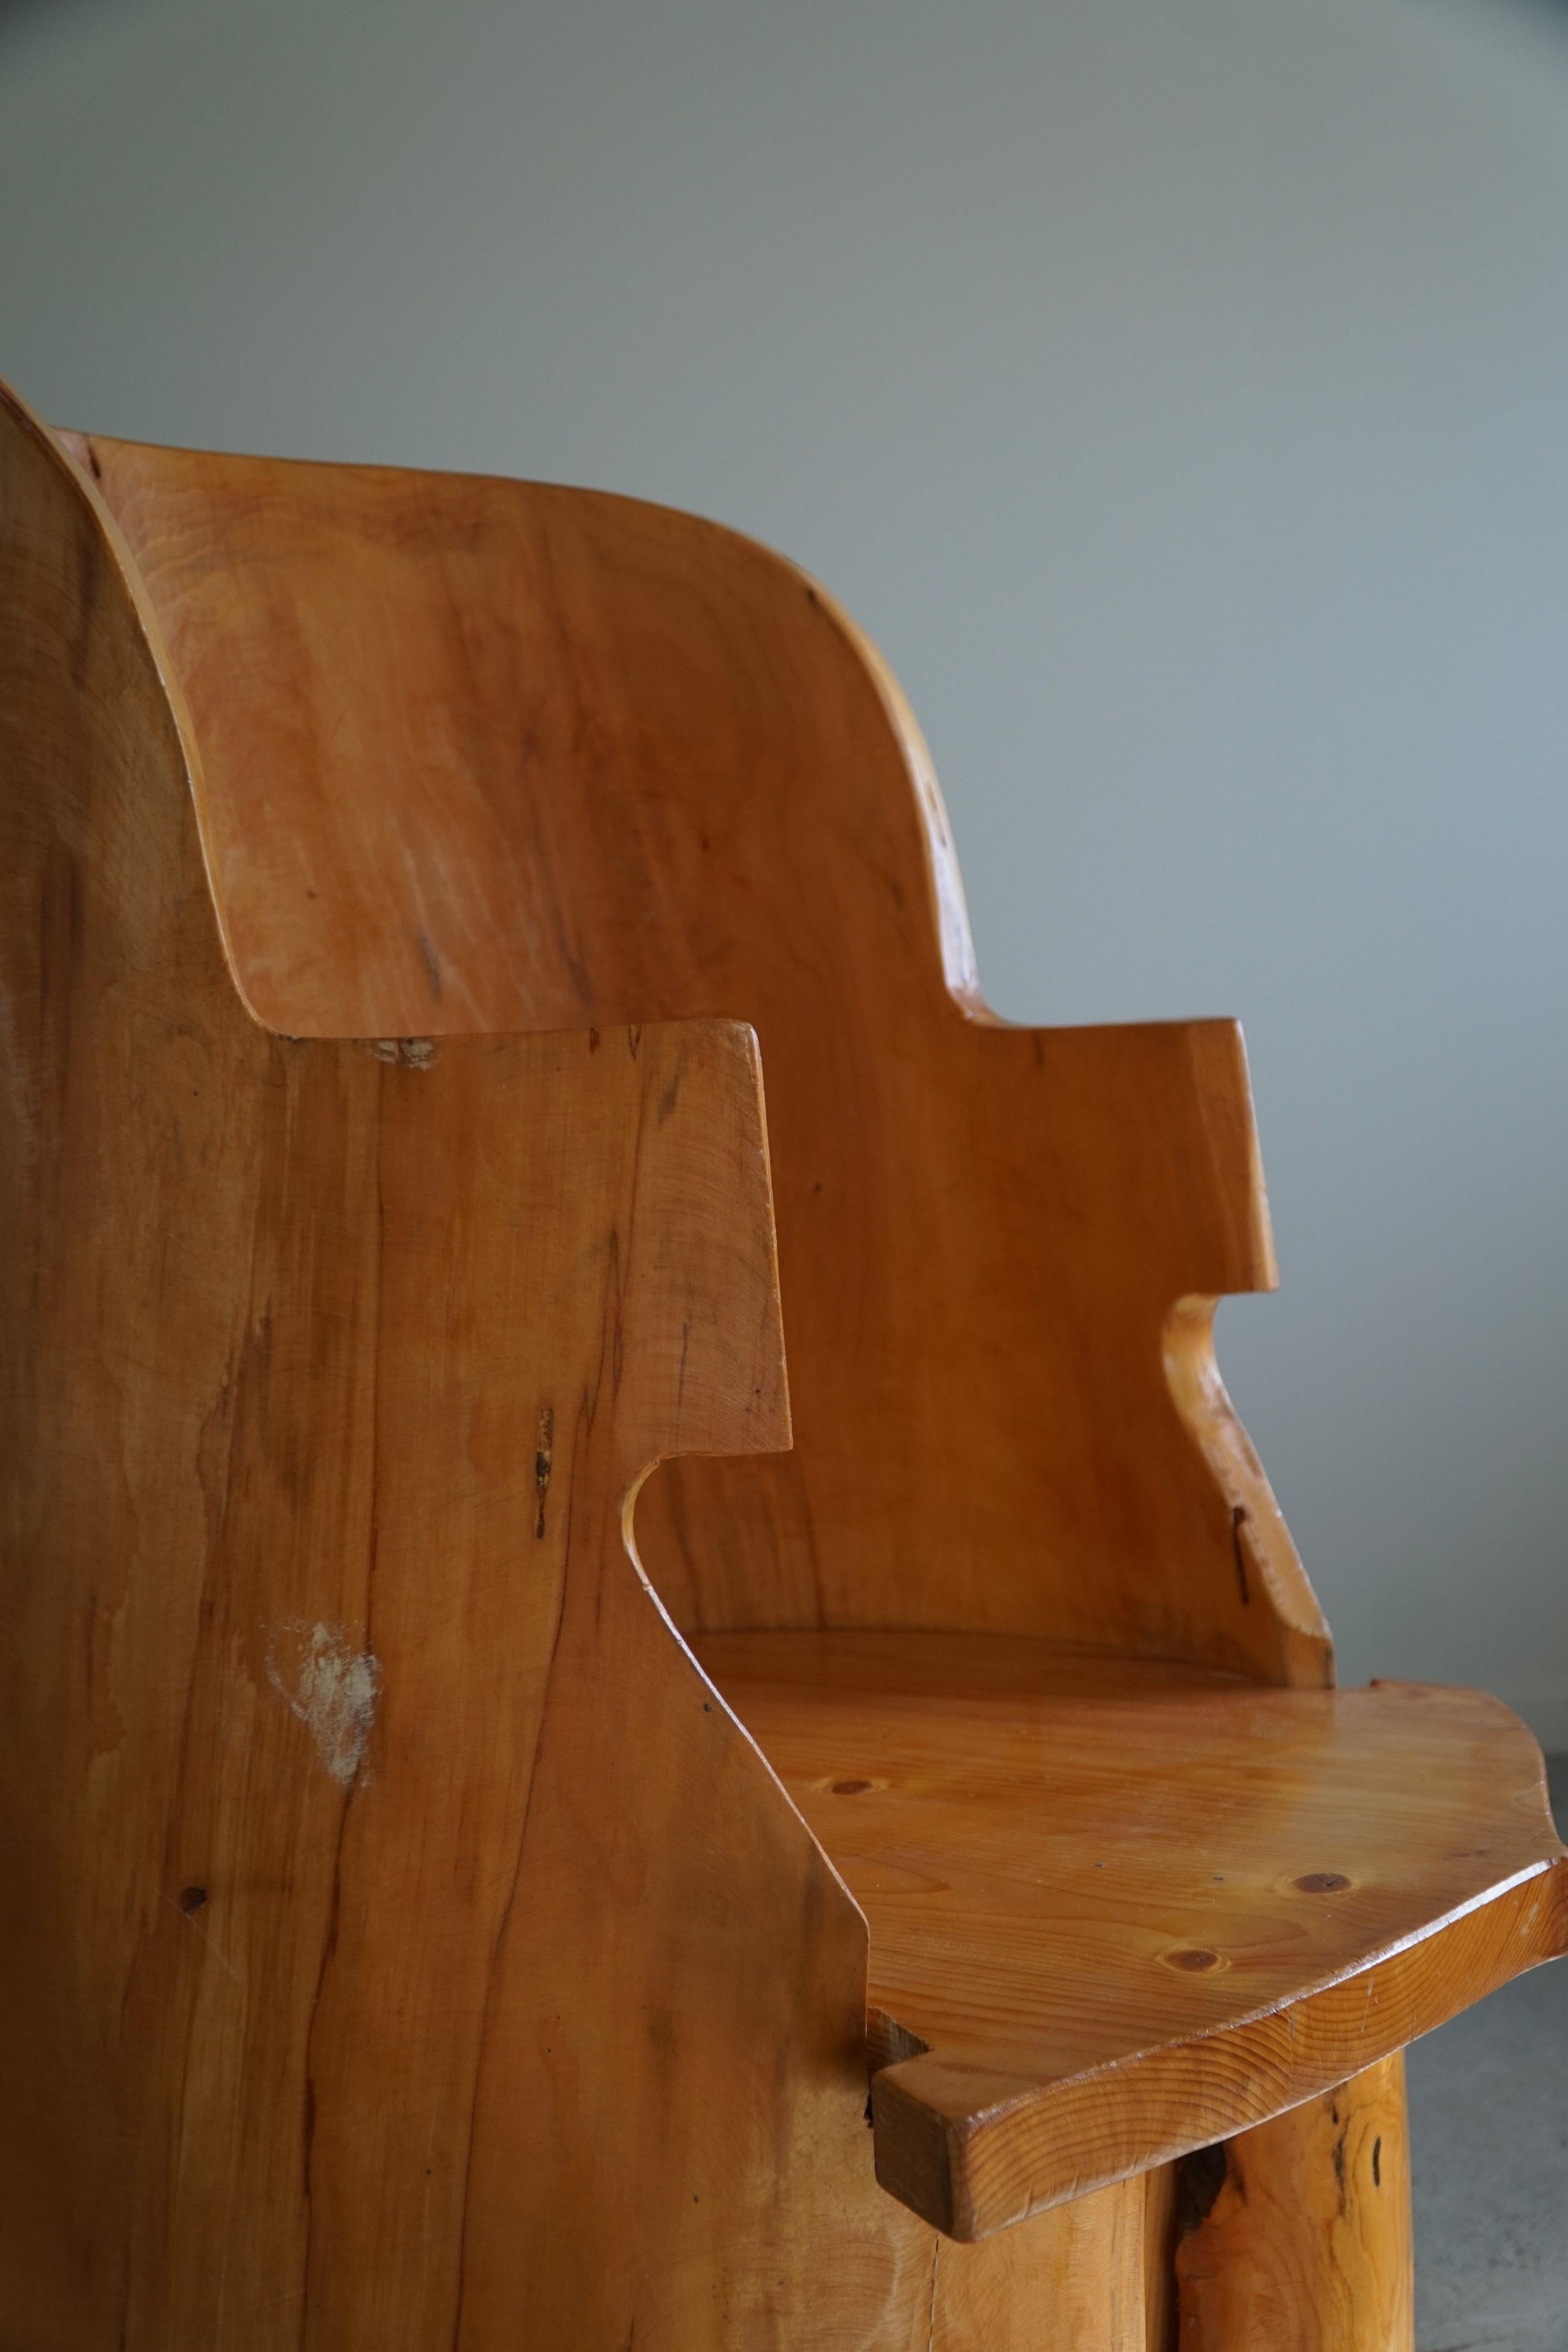 Hand-Carved Stump Chair in Solid Birch by a Swedish Cabinetmaker, Wabi Sabi, 1950s For Sale